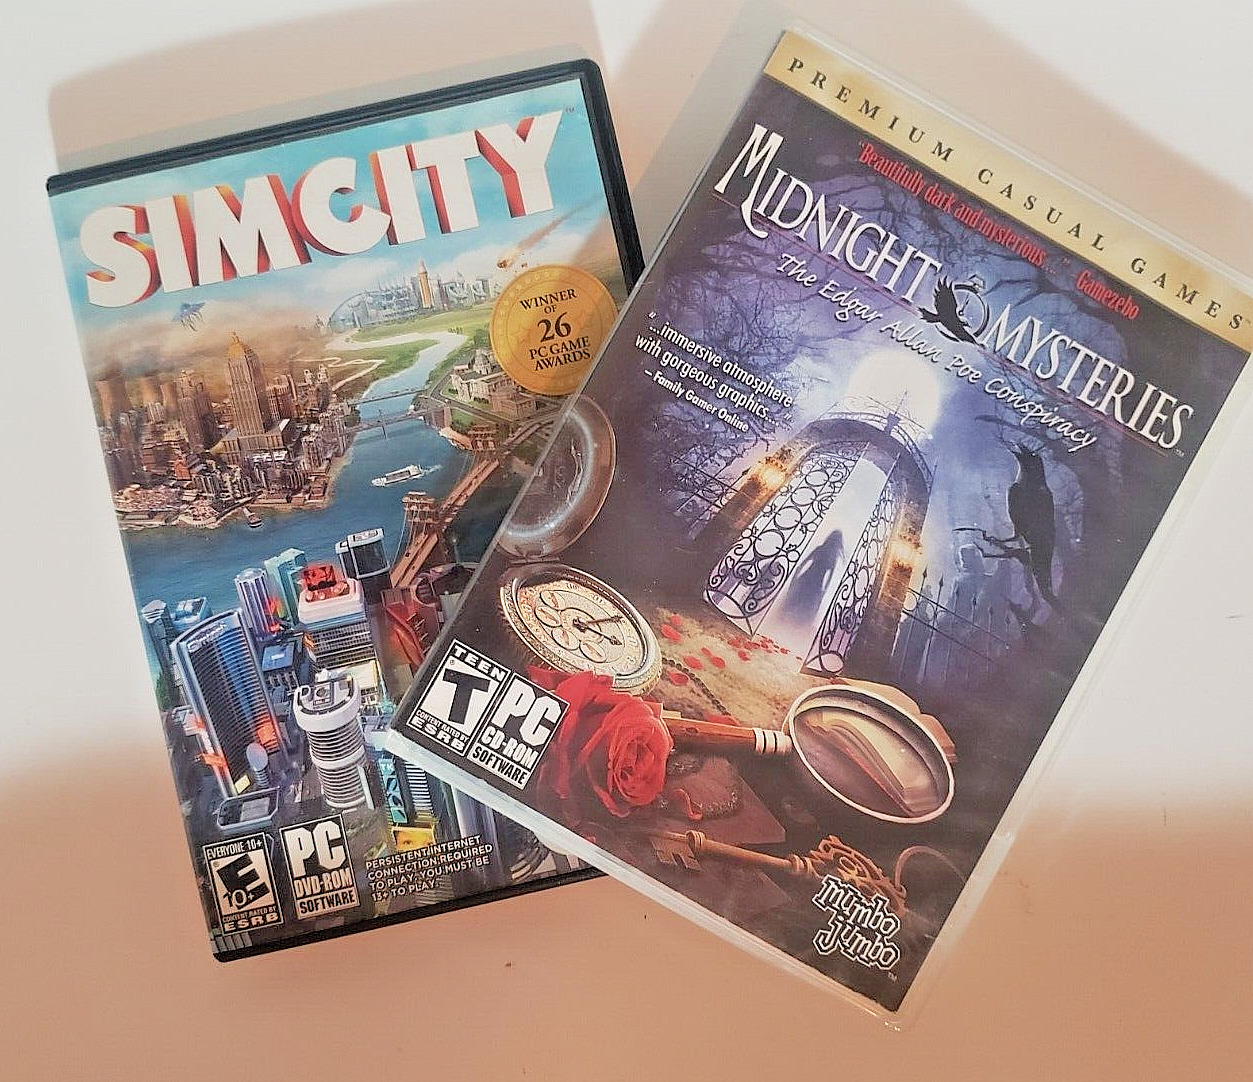 Midnight Mysteries & Sim City PC Computer Games - Lot of 2 - Used